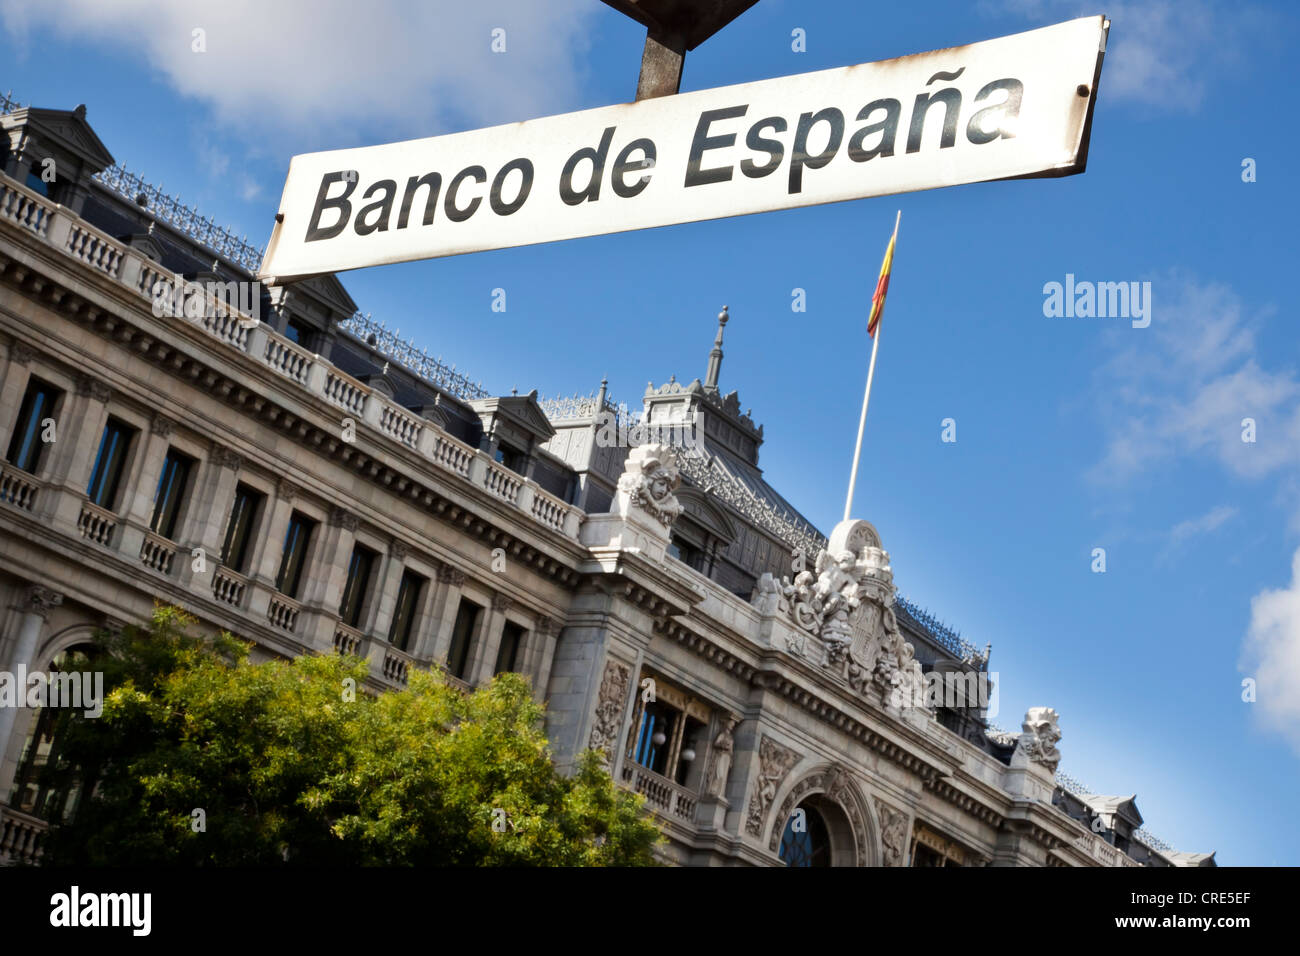 Sign for the metro station at the Central Bank of Spain, Banco de Espana, on Plaza de la Cibeles square, Madrid, Spain, Europe Stock Photo